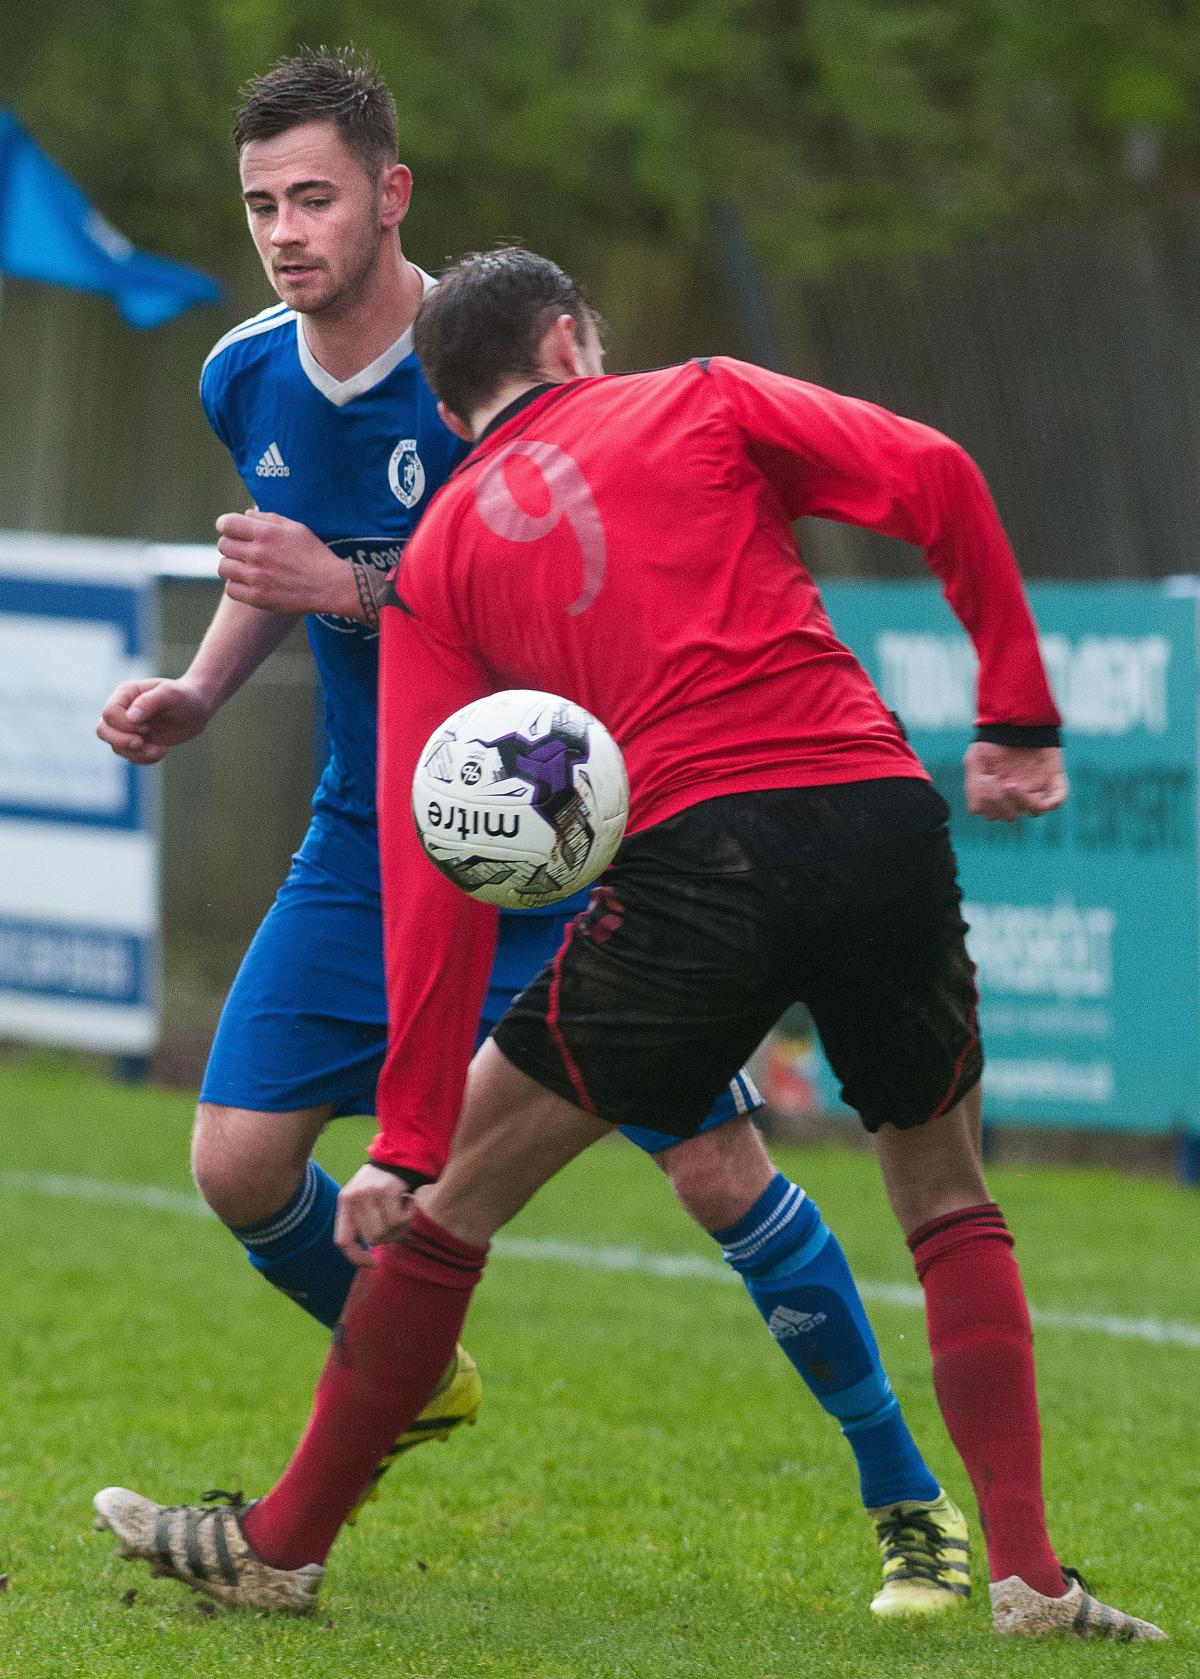 Andover Town's Shane Lock stops an attack in Town's 3-0 defeat to Lymington at The Portway Stadium. 1st April, 2017 - Picture Andy Brooks